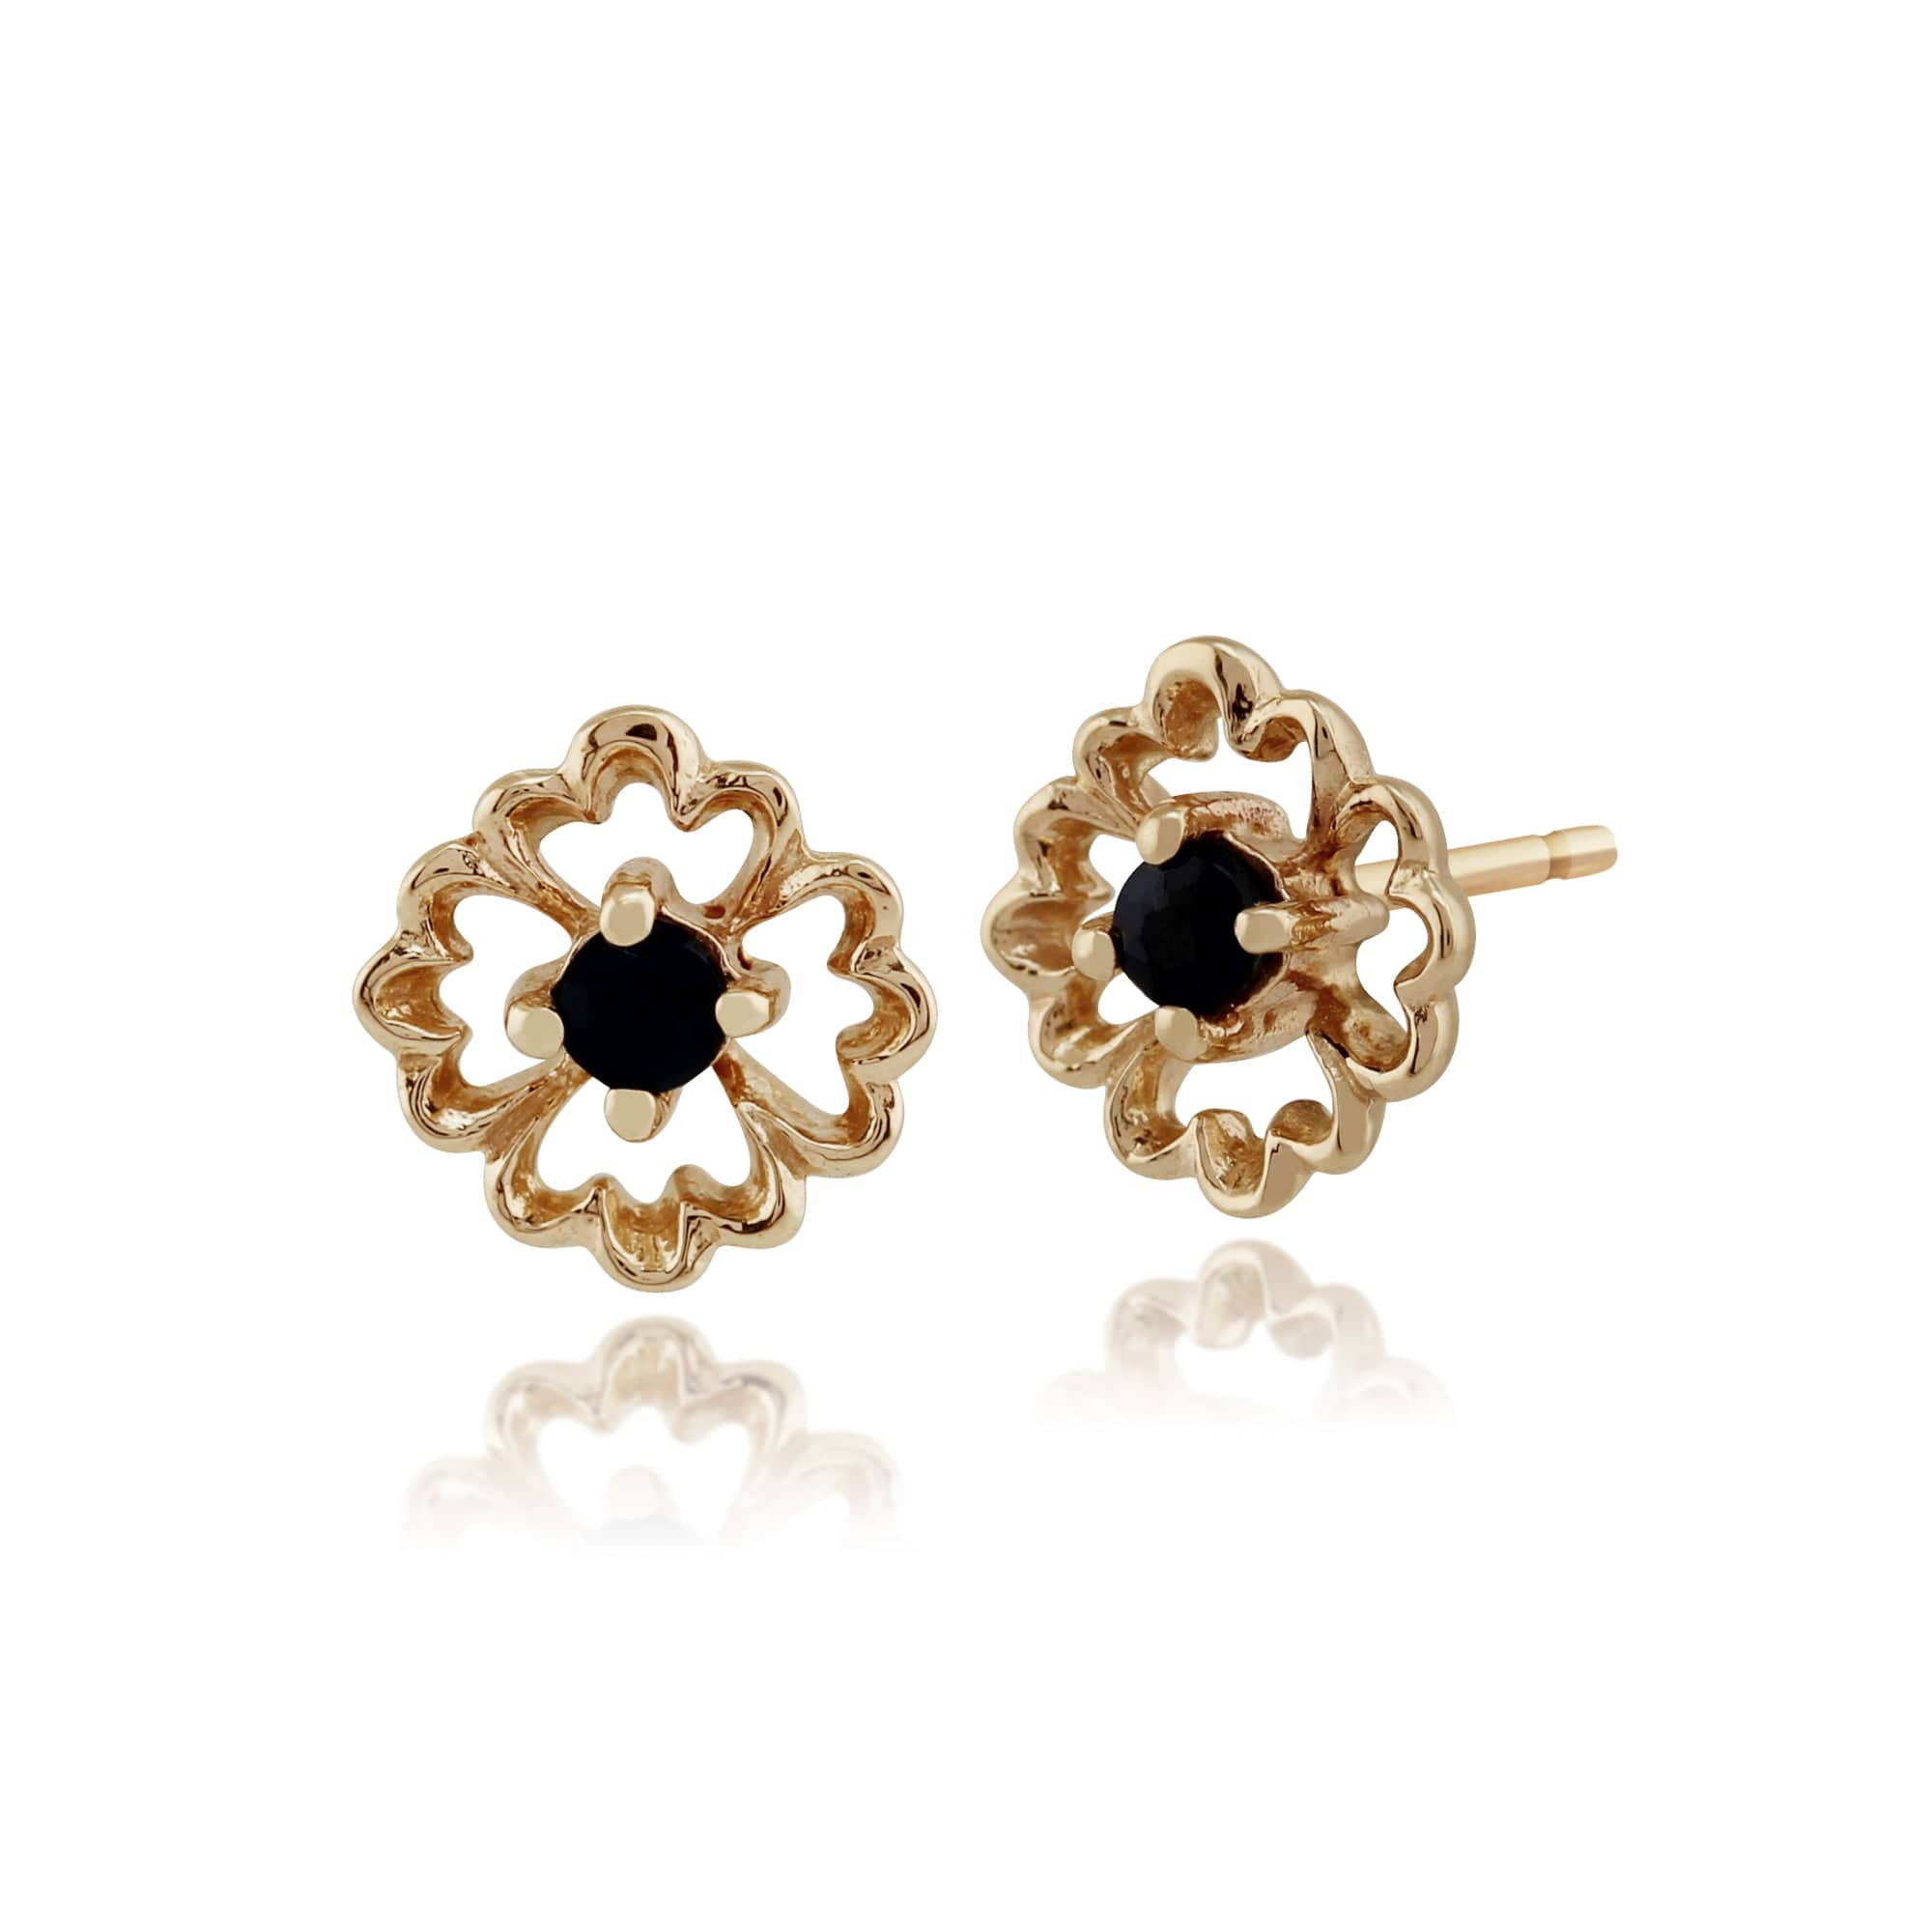 Floral Round Sapphire Stud Earrings in 9ct Yellow Gold - Gemondo